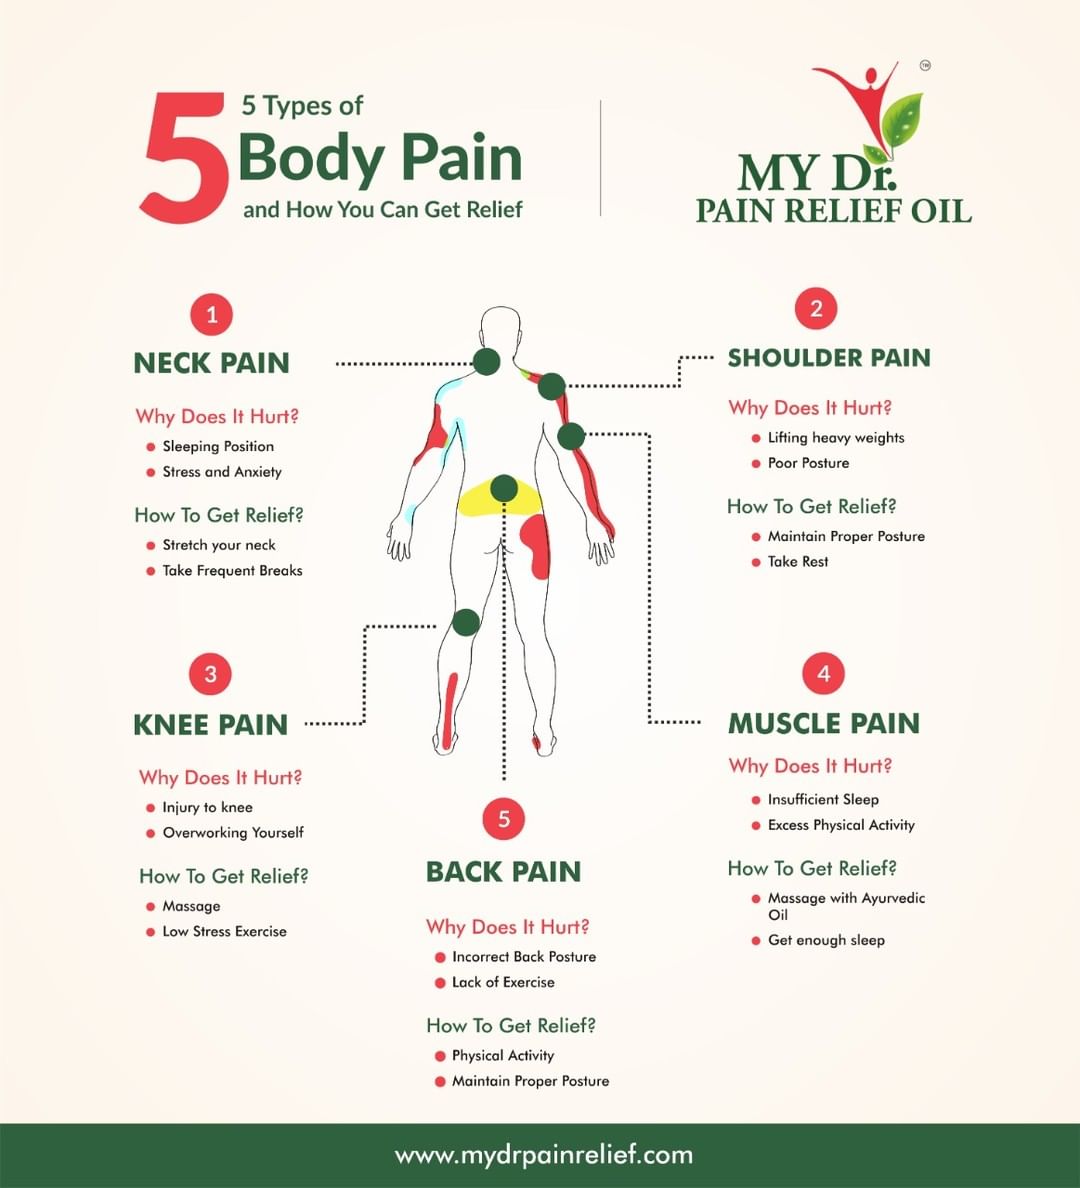 5 Types of body pain & How to get relief